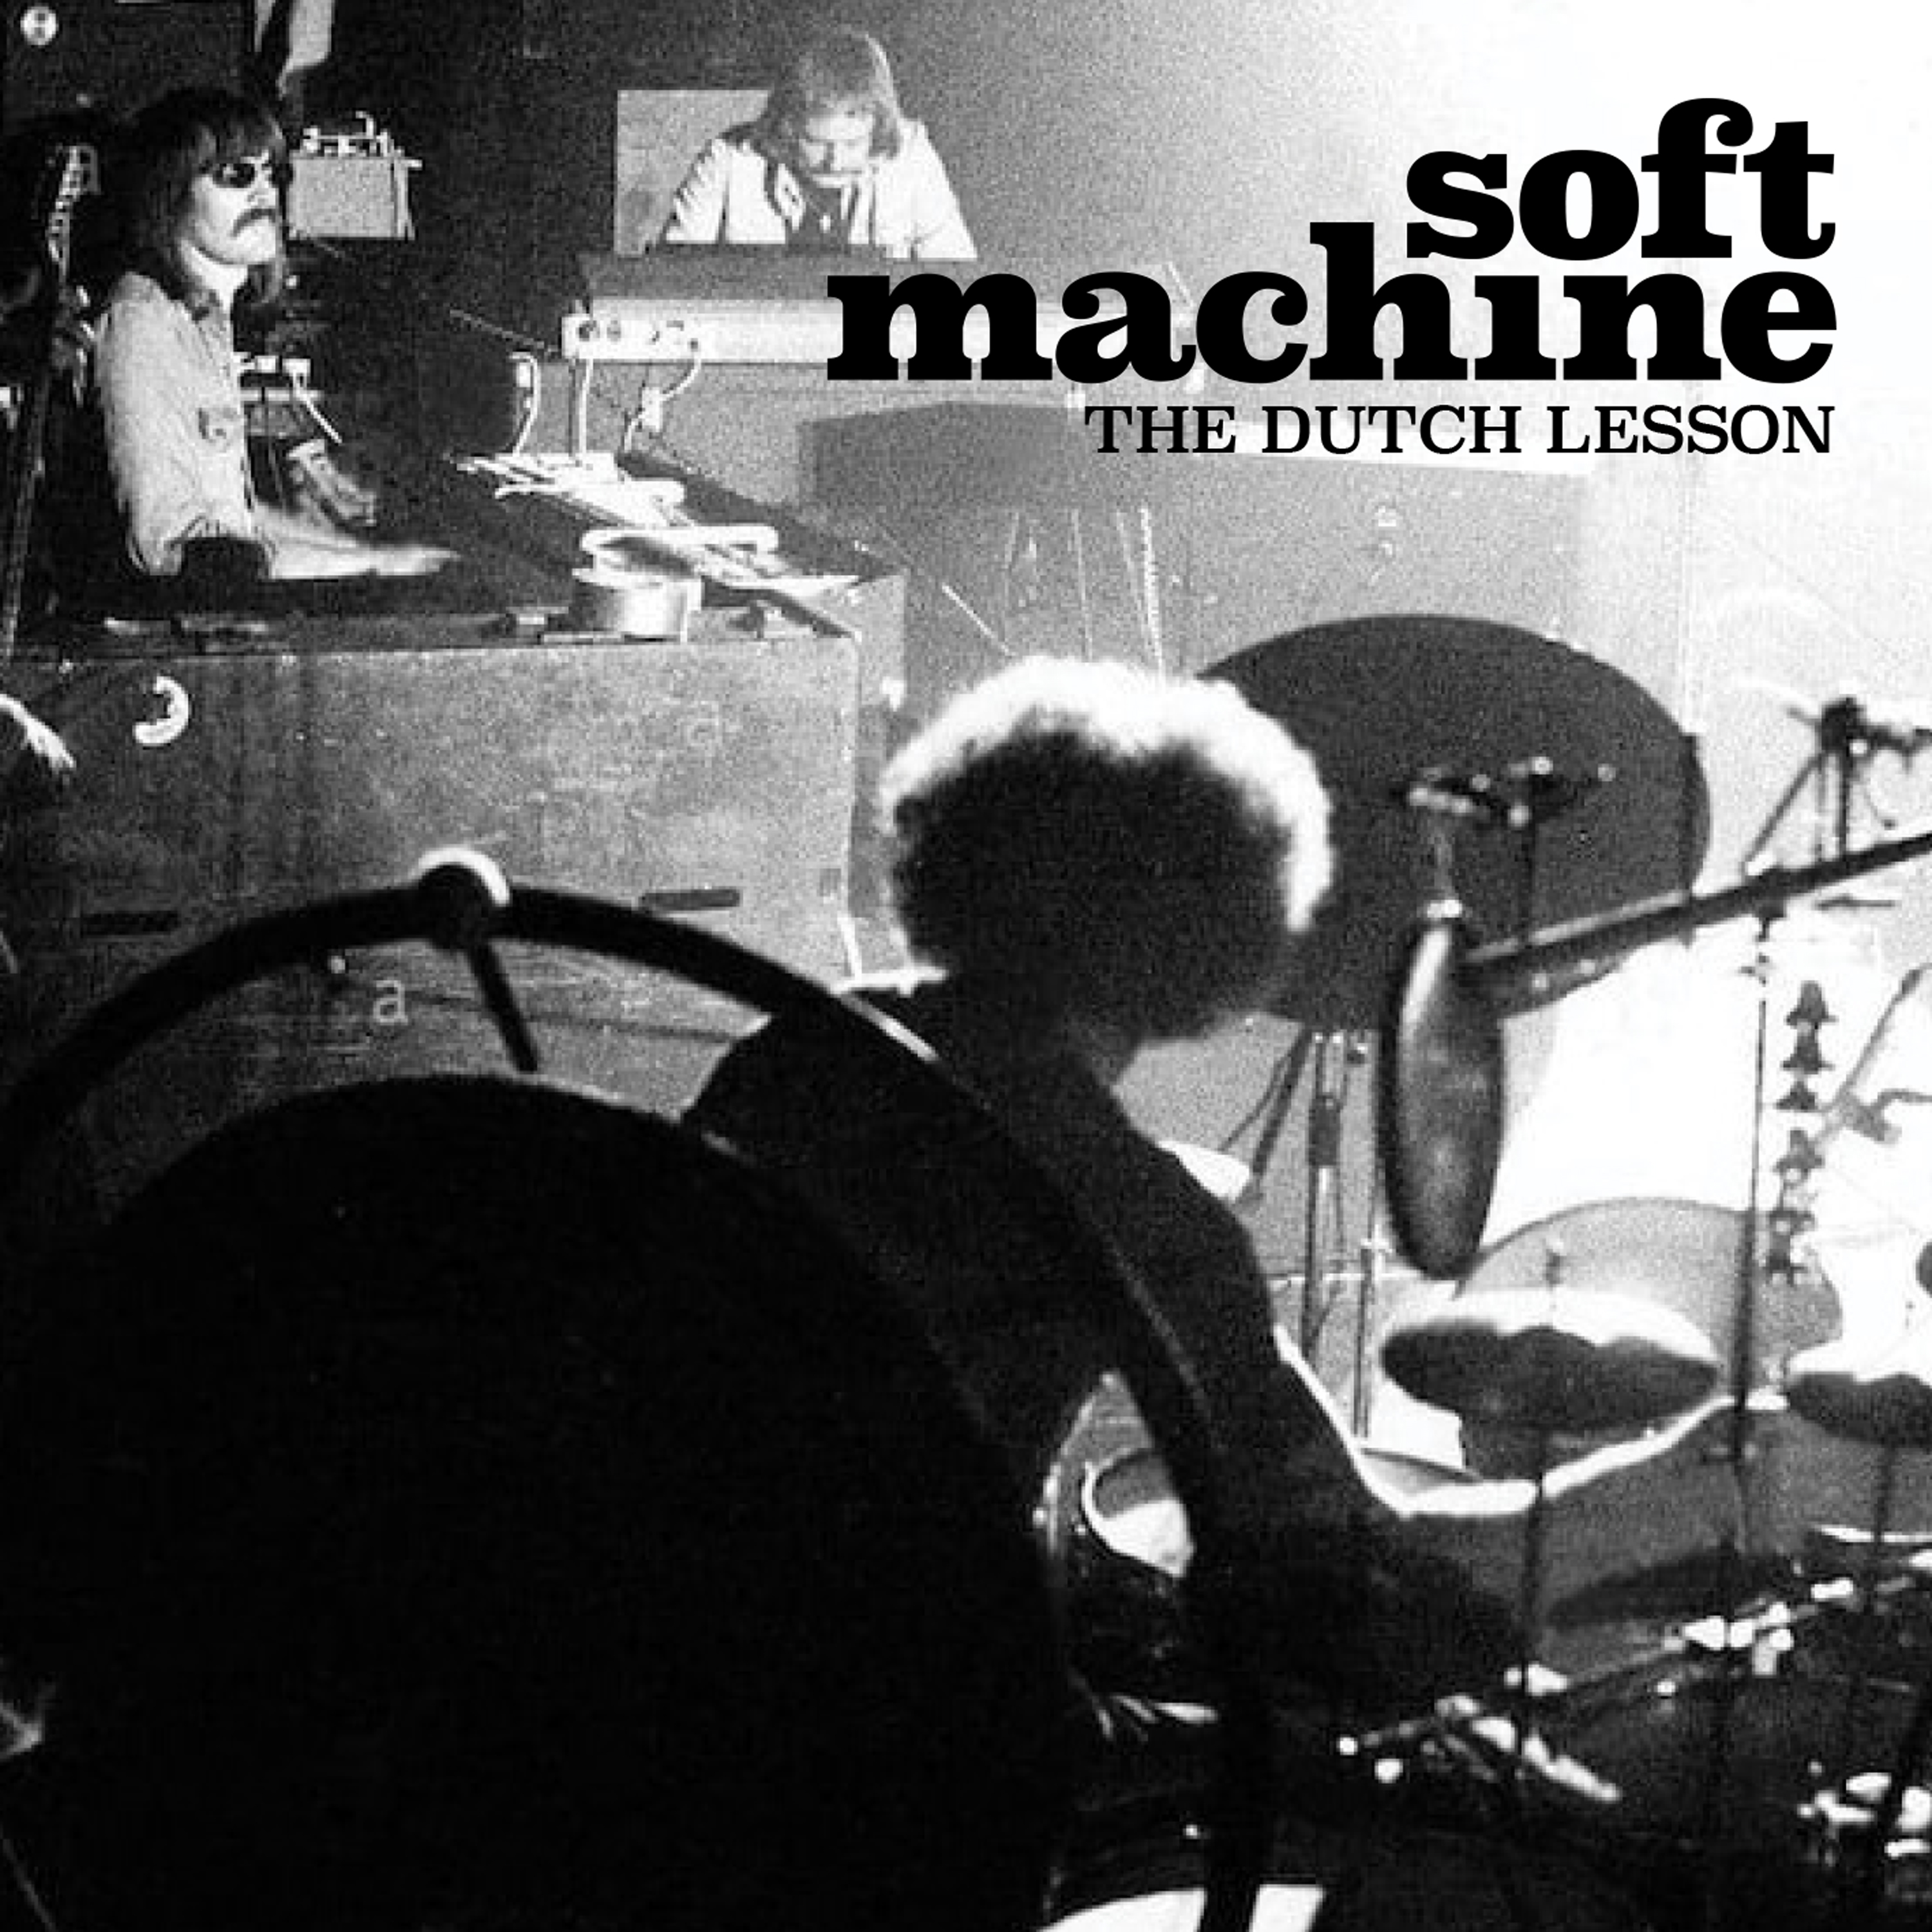 Britain’s SOFT MACHINE Were Restlessly Creative THE DUTCH LESSON Captures Them in Late October 1973